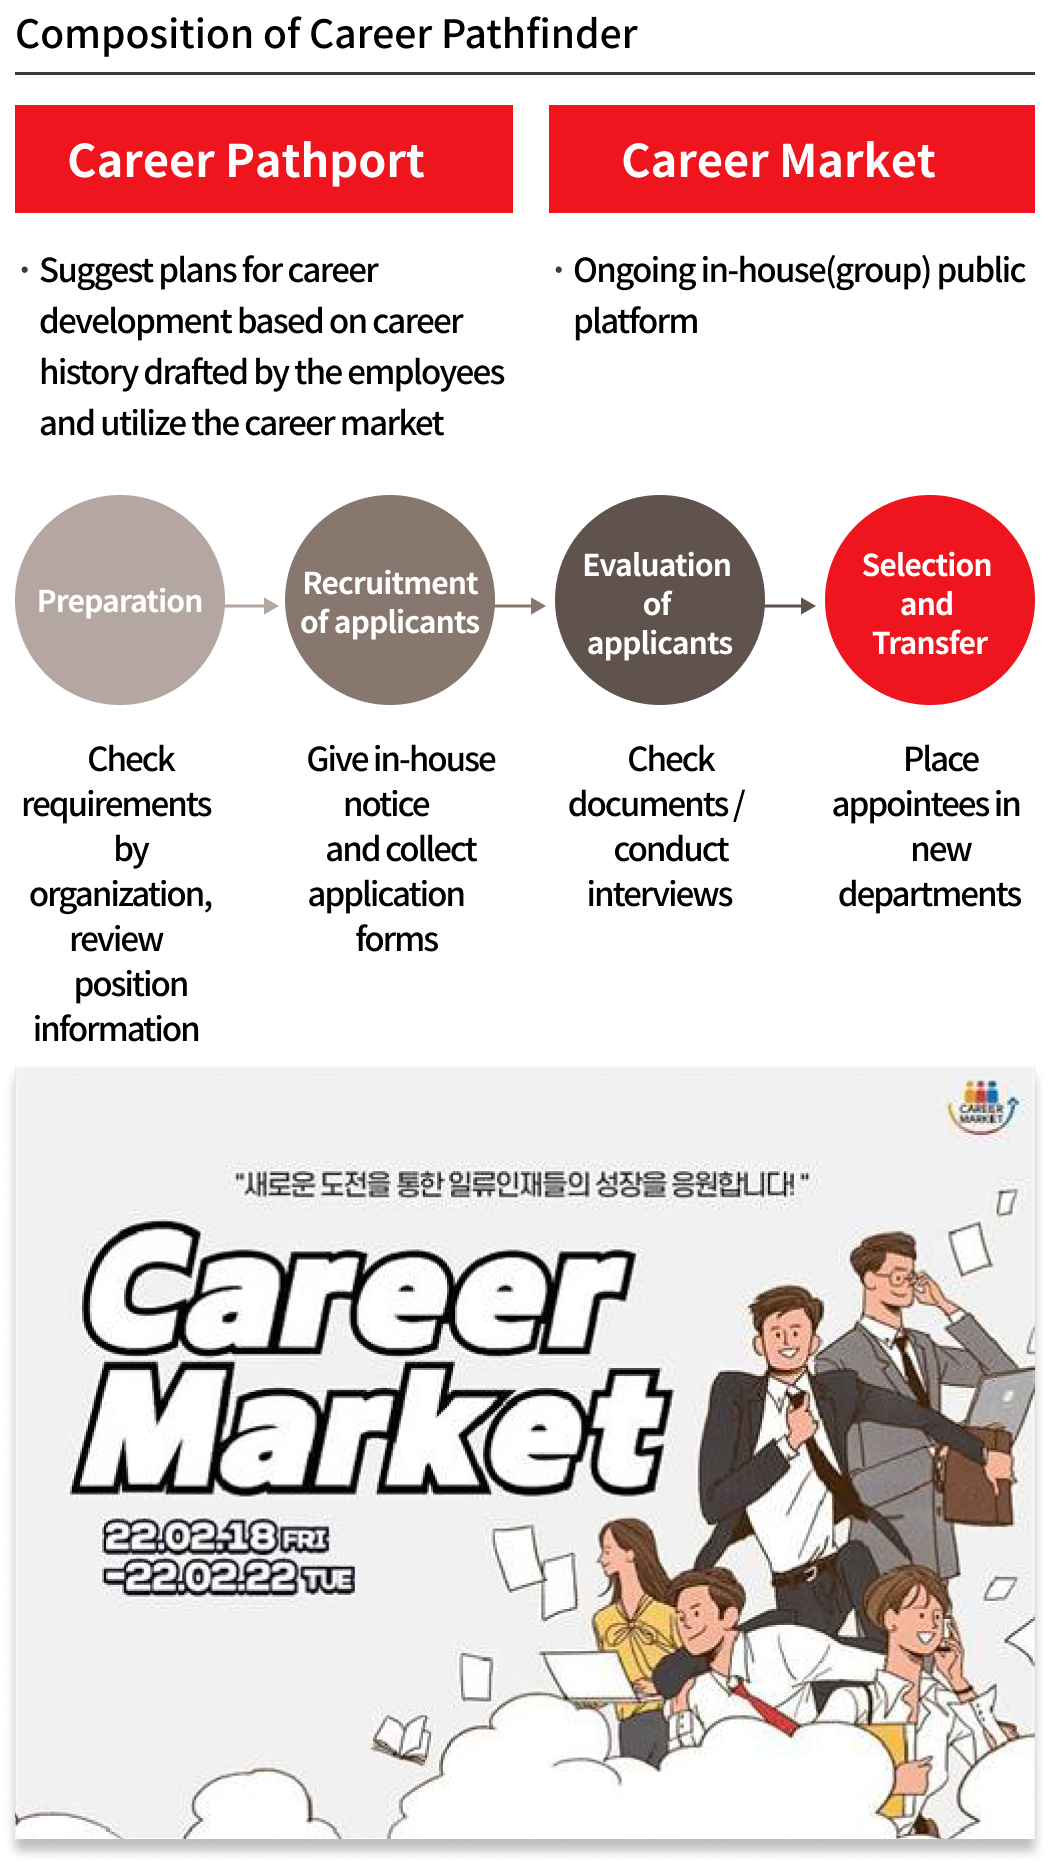 Composition of Career Pathfinder